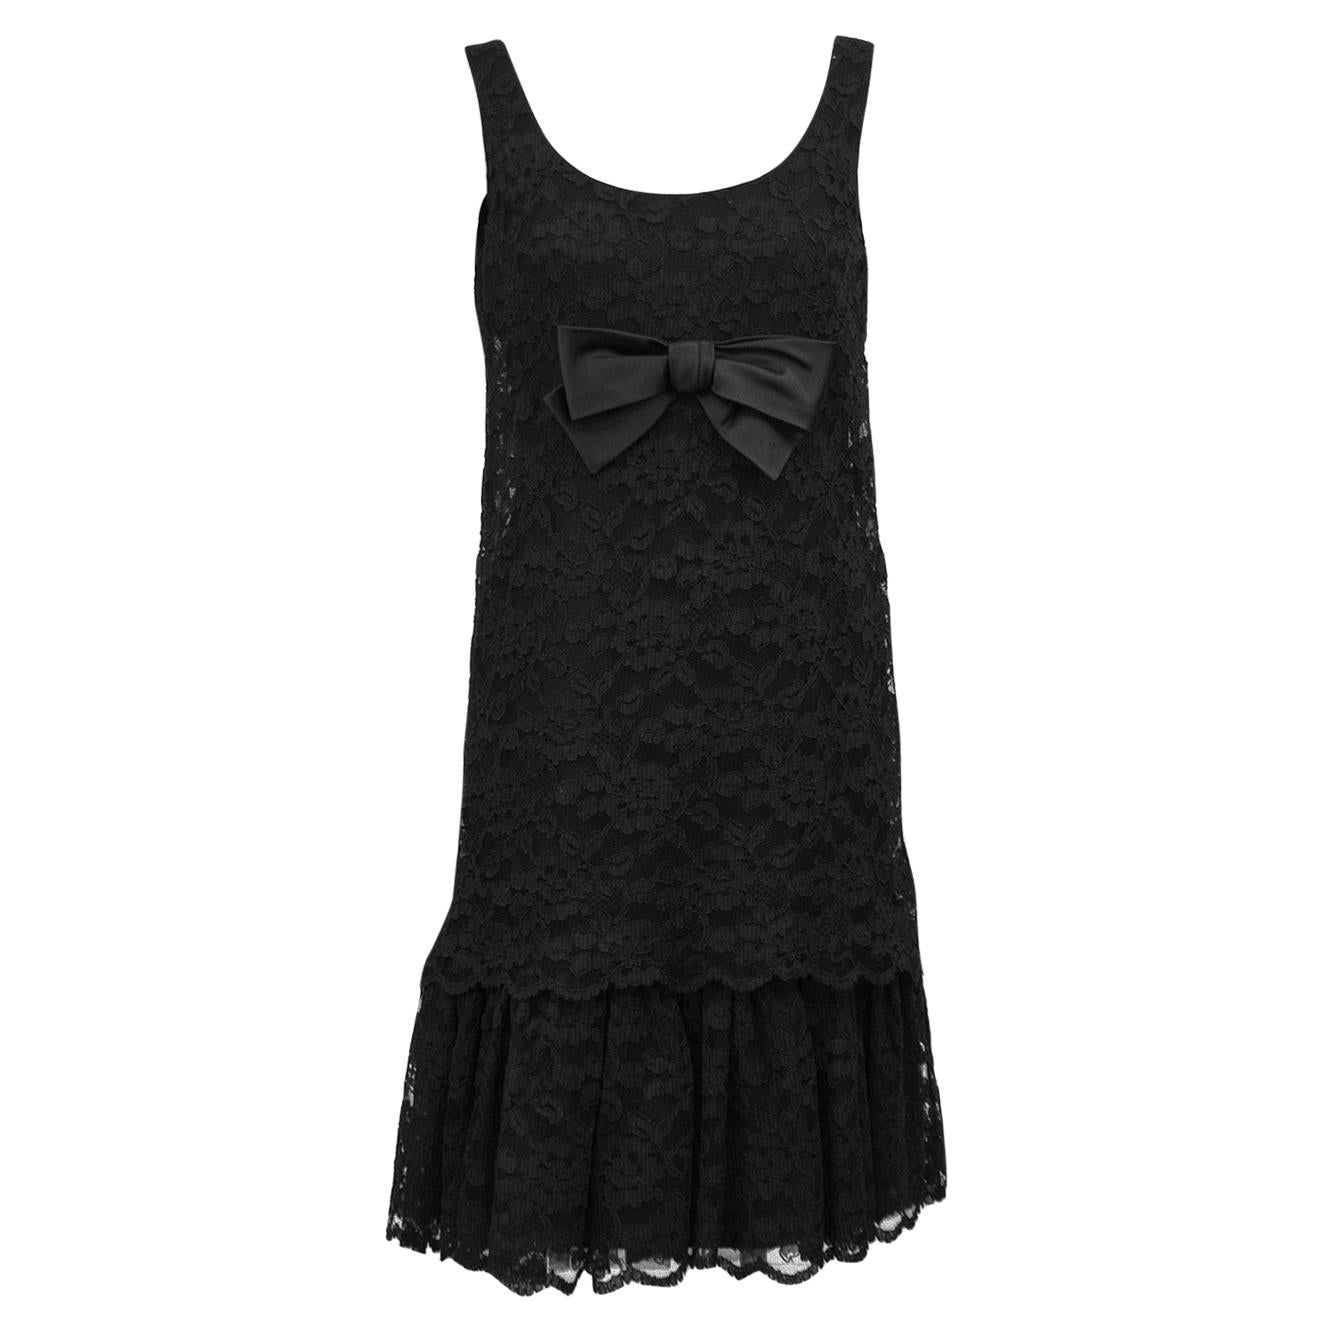 1960s Black Lace Cocktail Dress with Bow For Sale